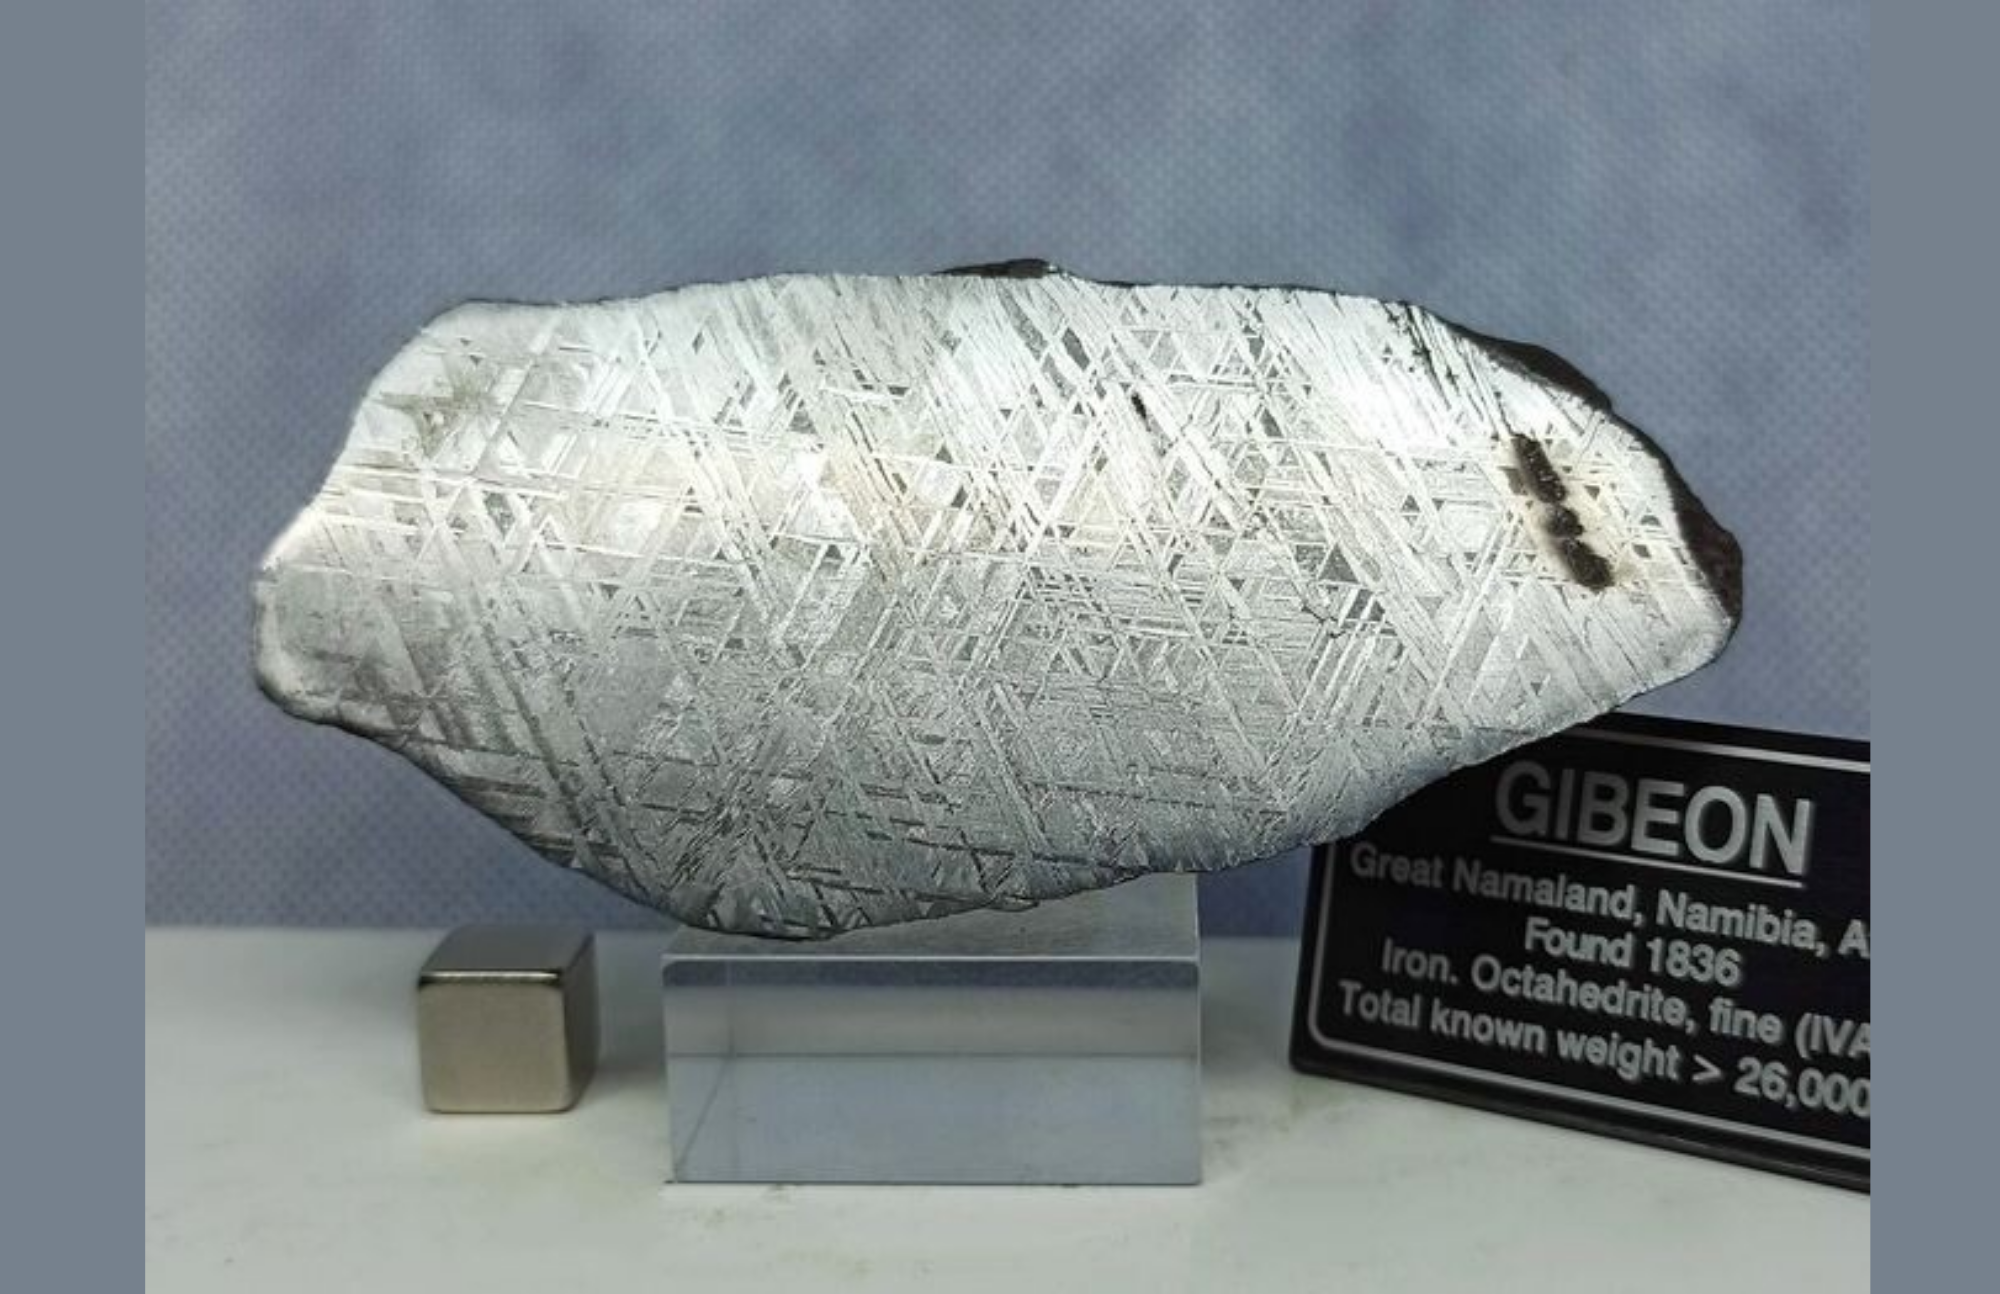 A gibeon meteorite with fussion crust and widmanstatten lines on a museum